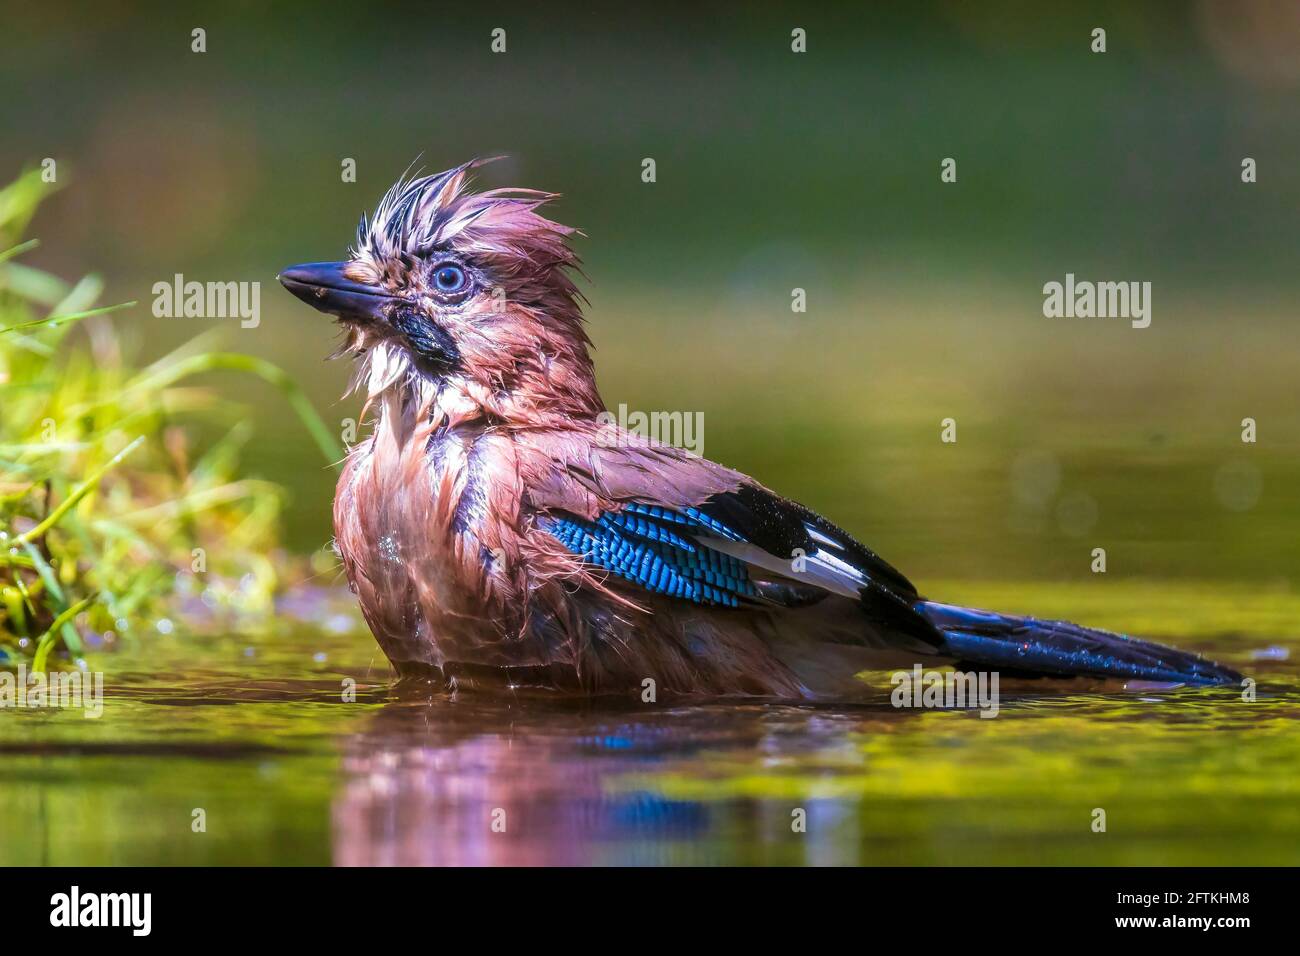 Closeup of a wet Eurasian jay bird Garrulus glandarius washing, preening and cleaning in water. Selective focus and low poit of view Stock Photo